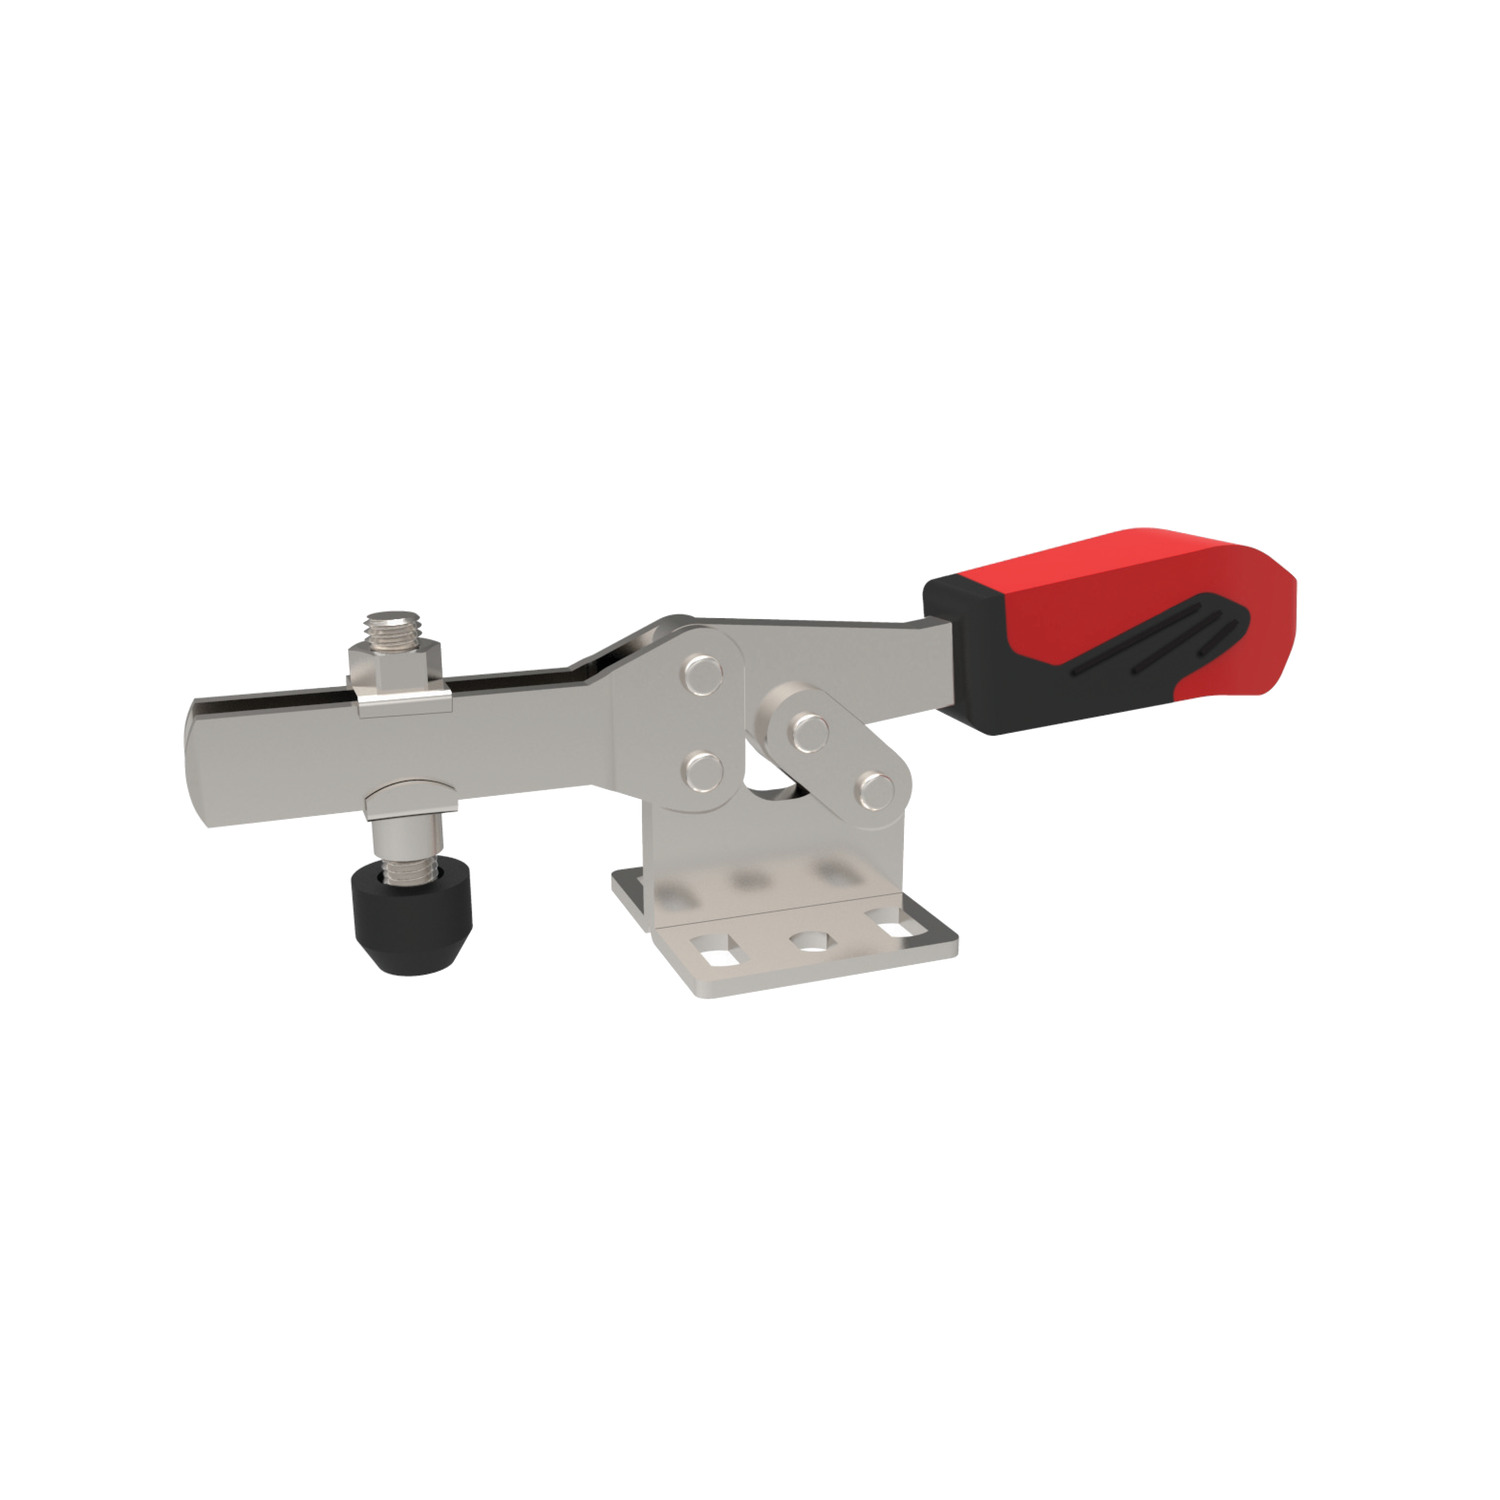 Product 41000.4, Horizontal Acting Toggle Clamps stainless steel - open arm - horizontal base / 